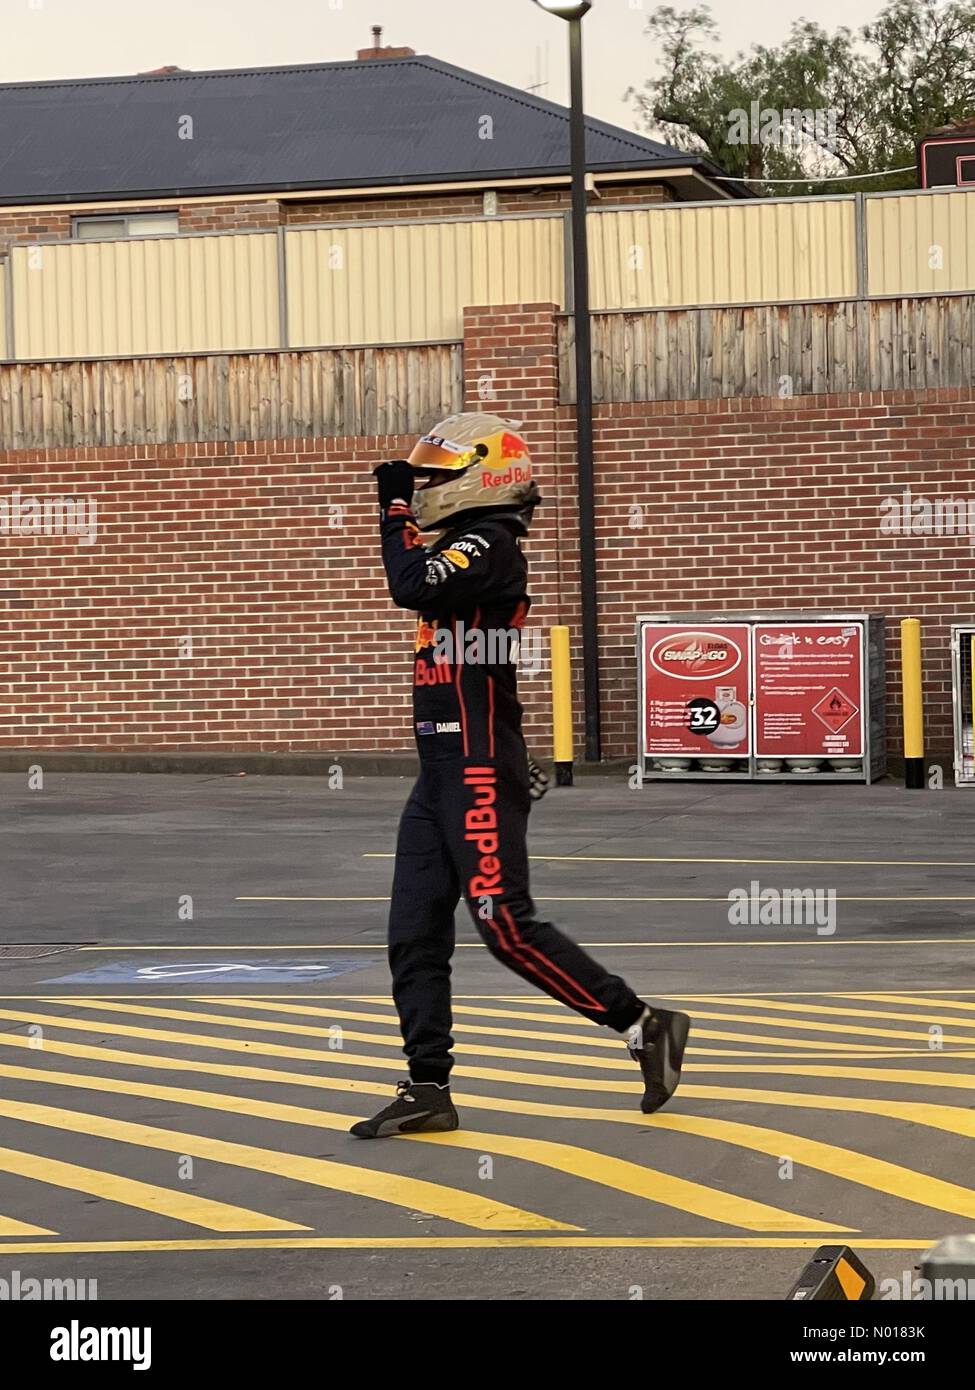 F1 driver Liam Lawson seen filming a Red Bull commercial at a 7 Eleven service station in Bathurst, NSW, Australia Credit: mjmediabox/StockimoNews/Alamy Live News Stock Photo